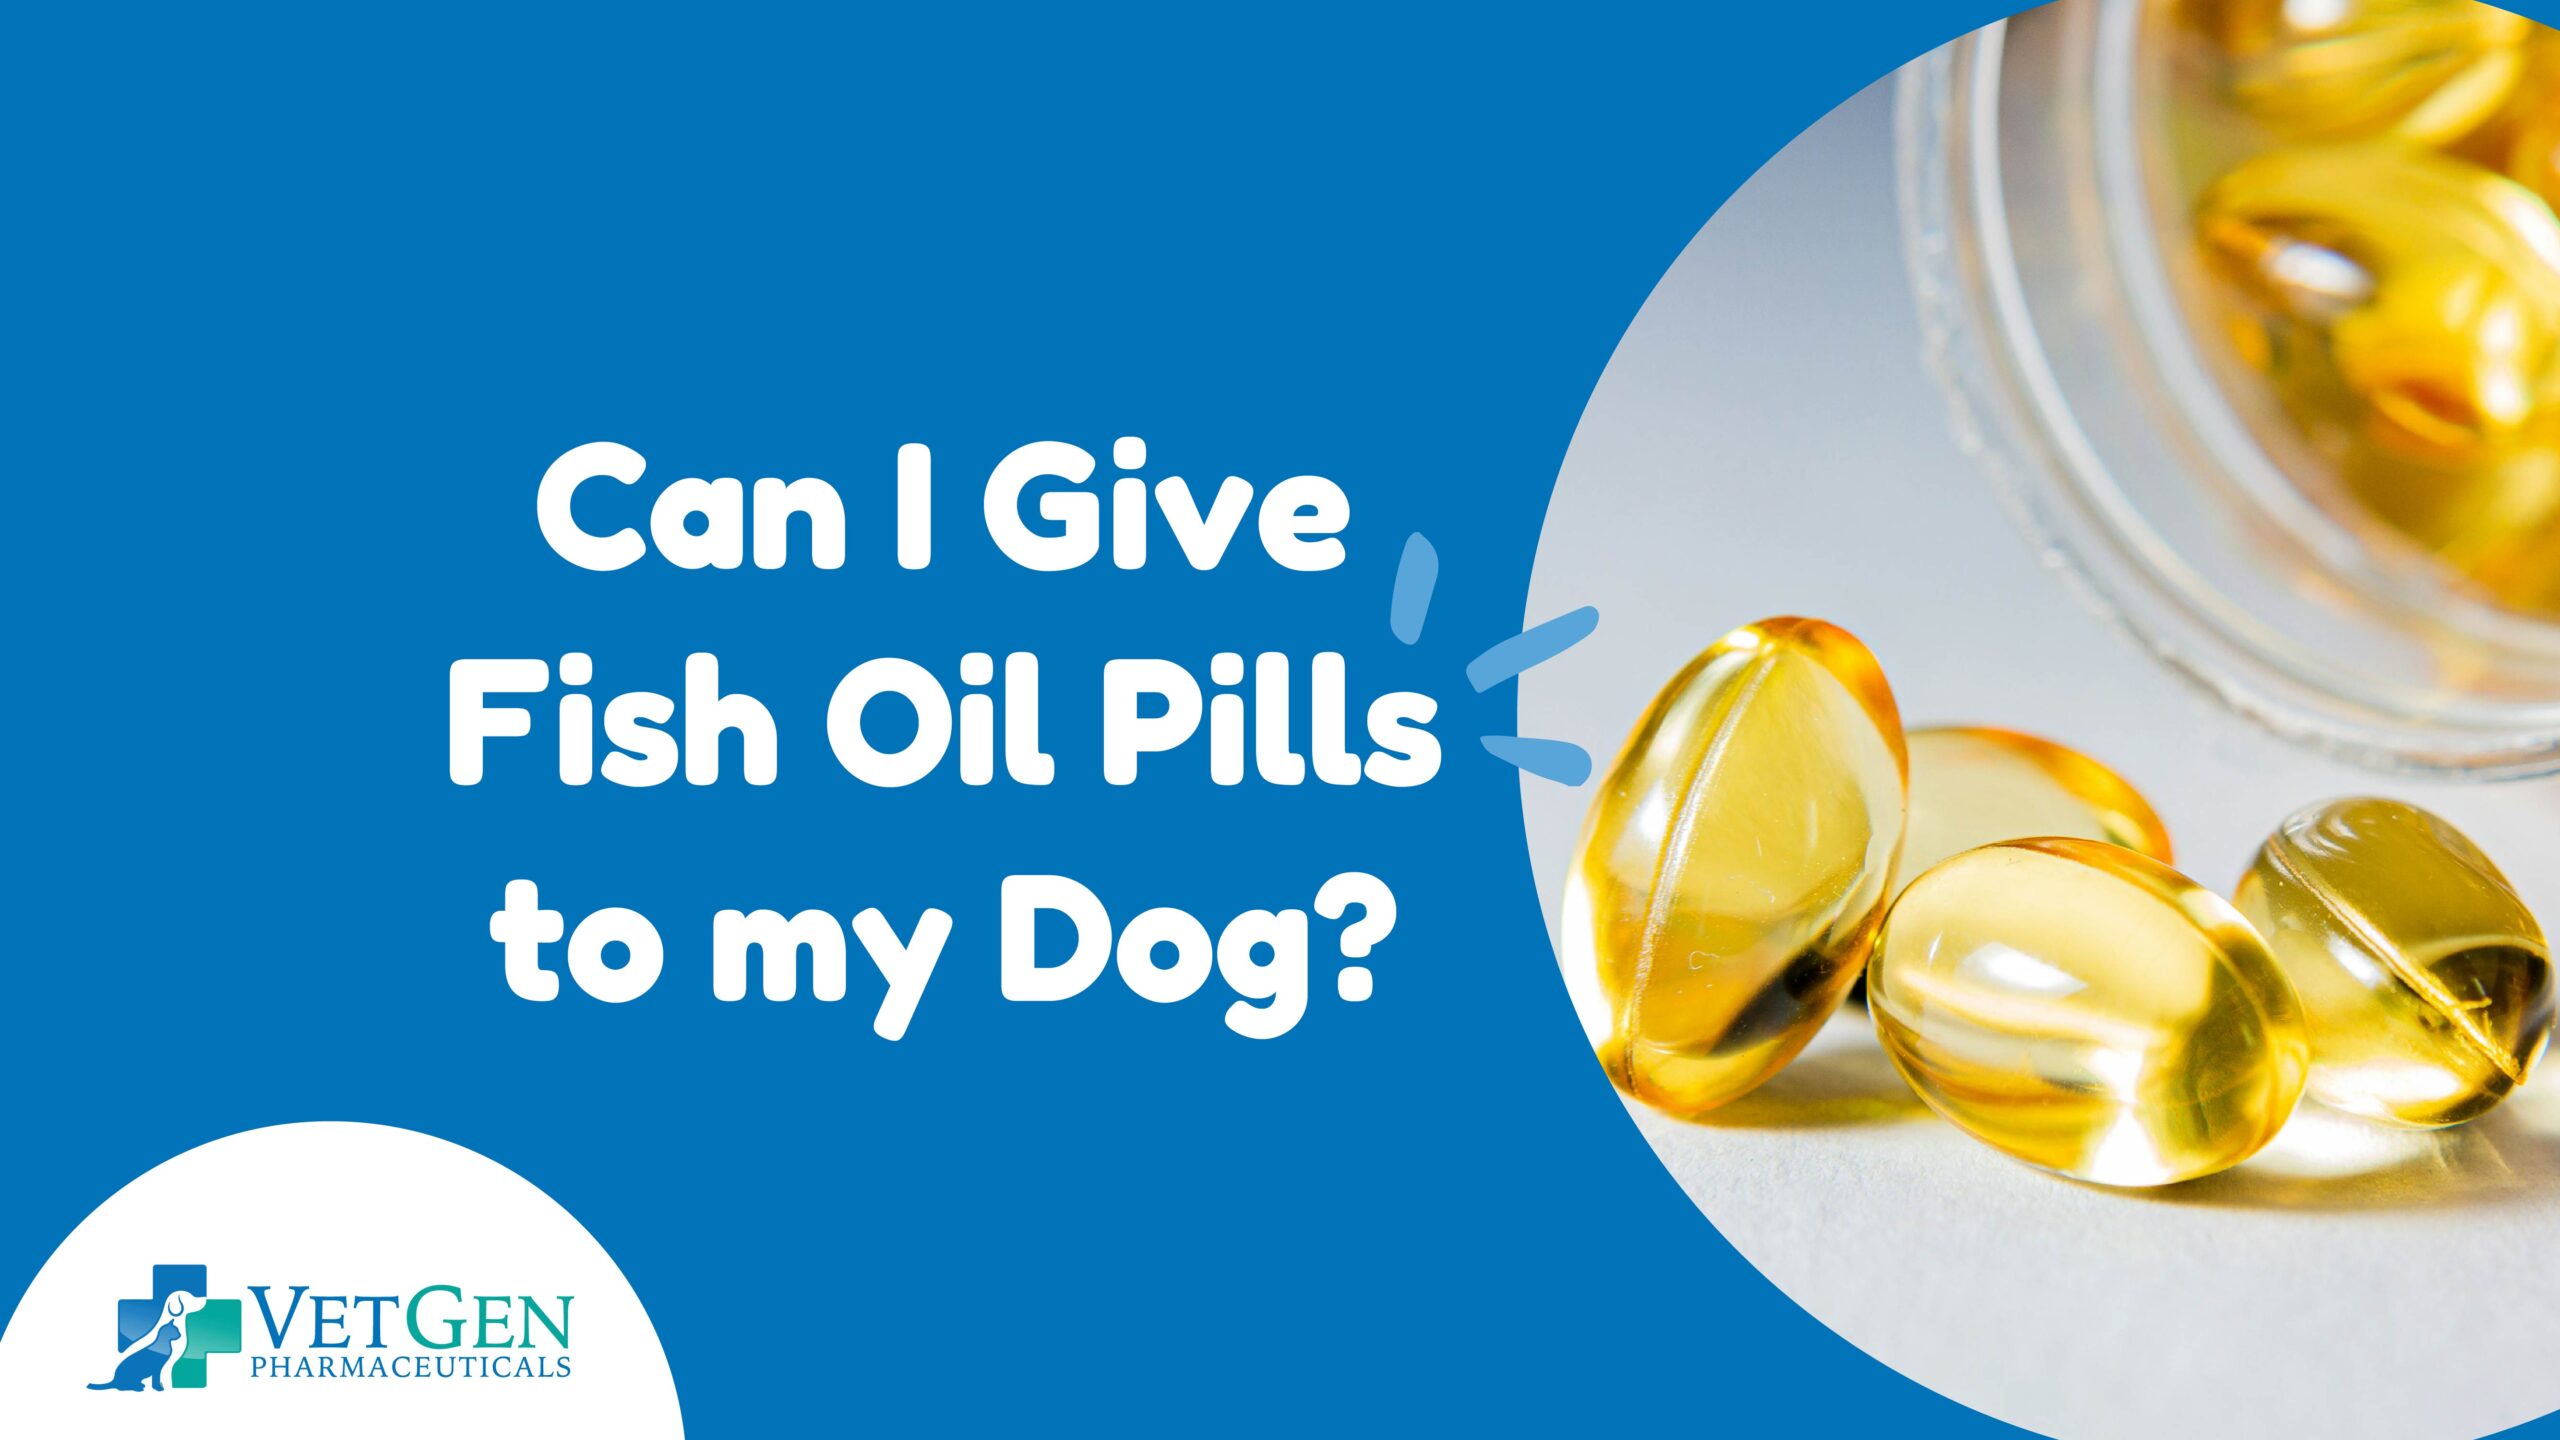 Can I give fish oil pills to my dog